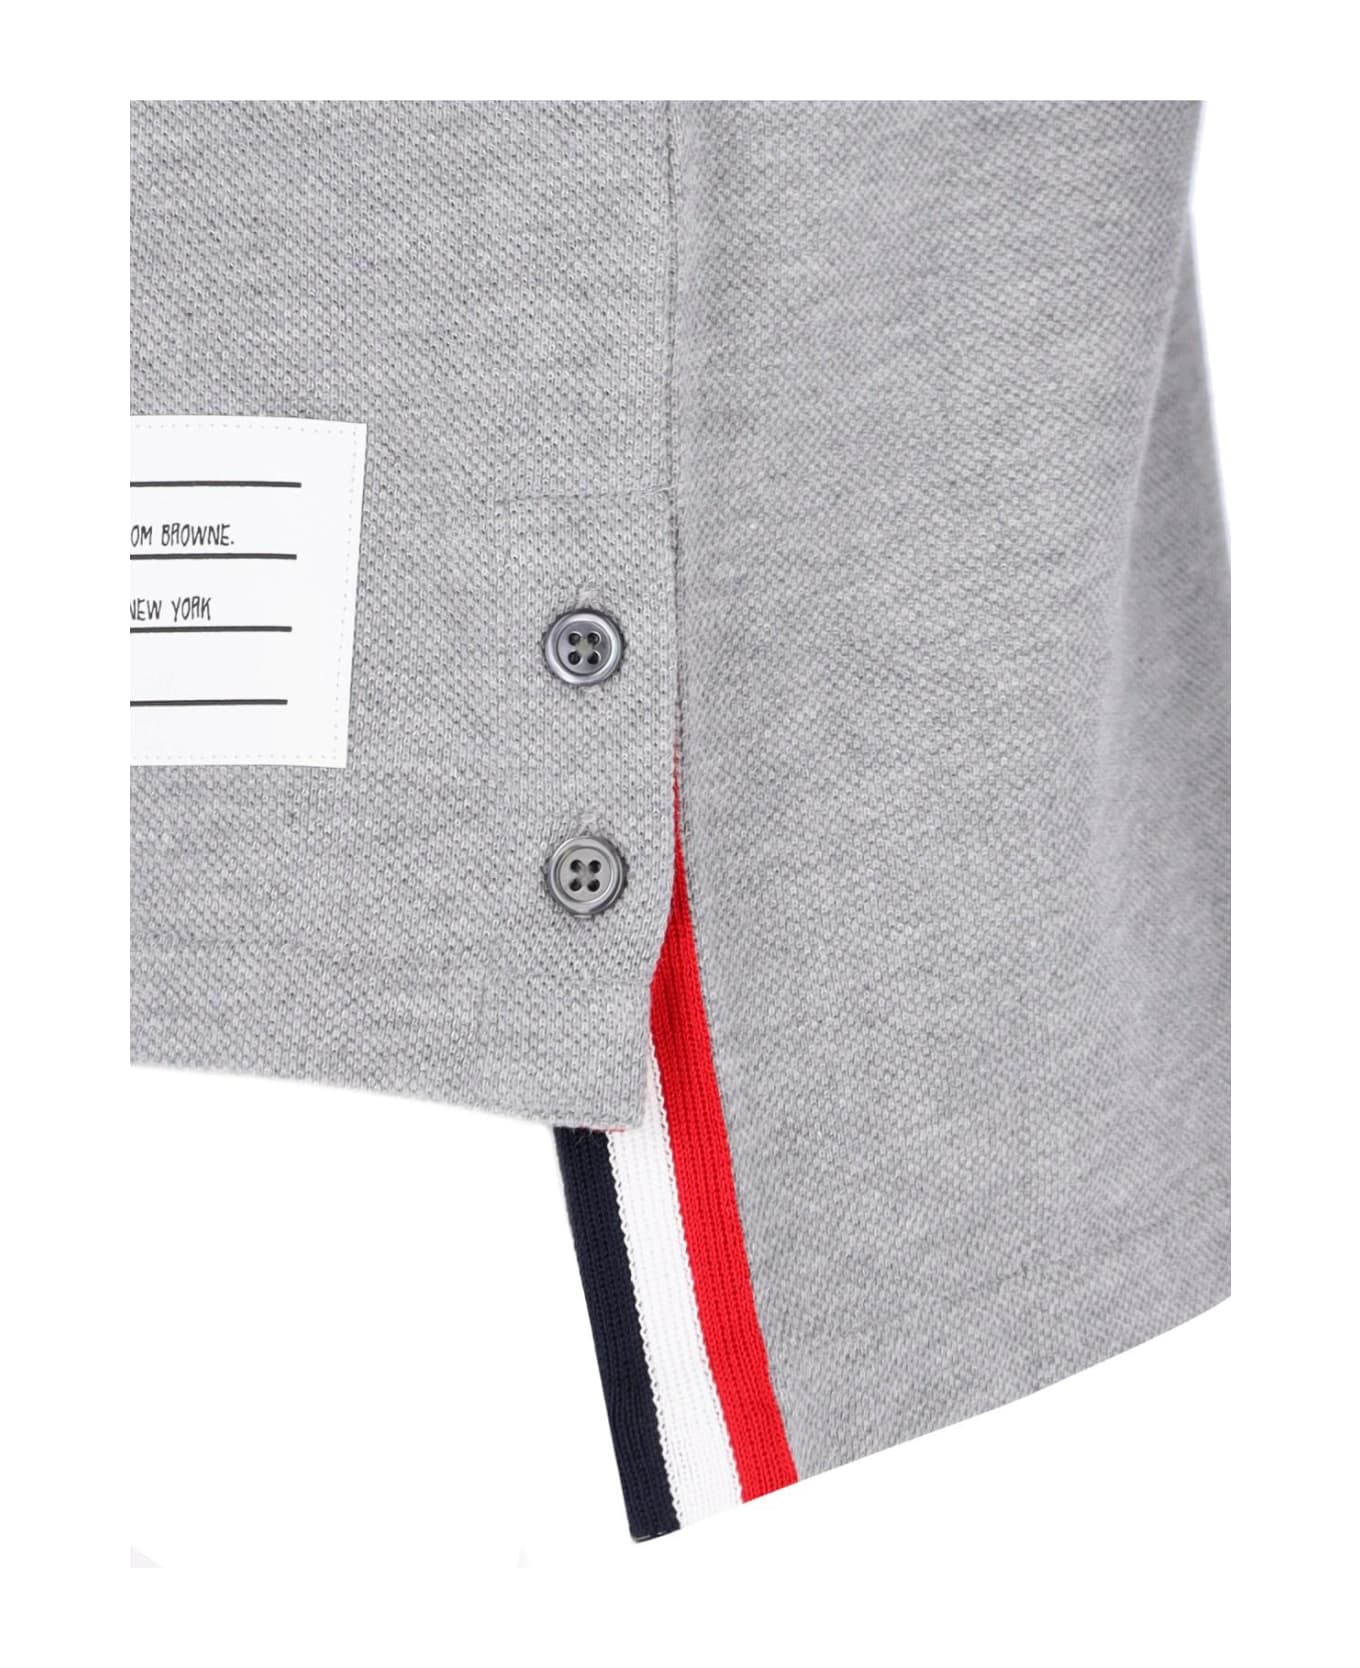 Thom Browne Polo Shirt With Tricolor Detail On The Back - Lt grey ポロシャツ